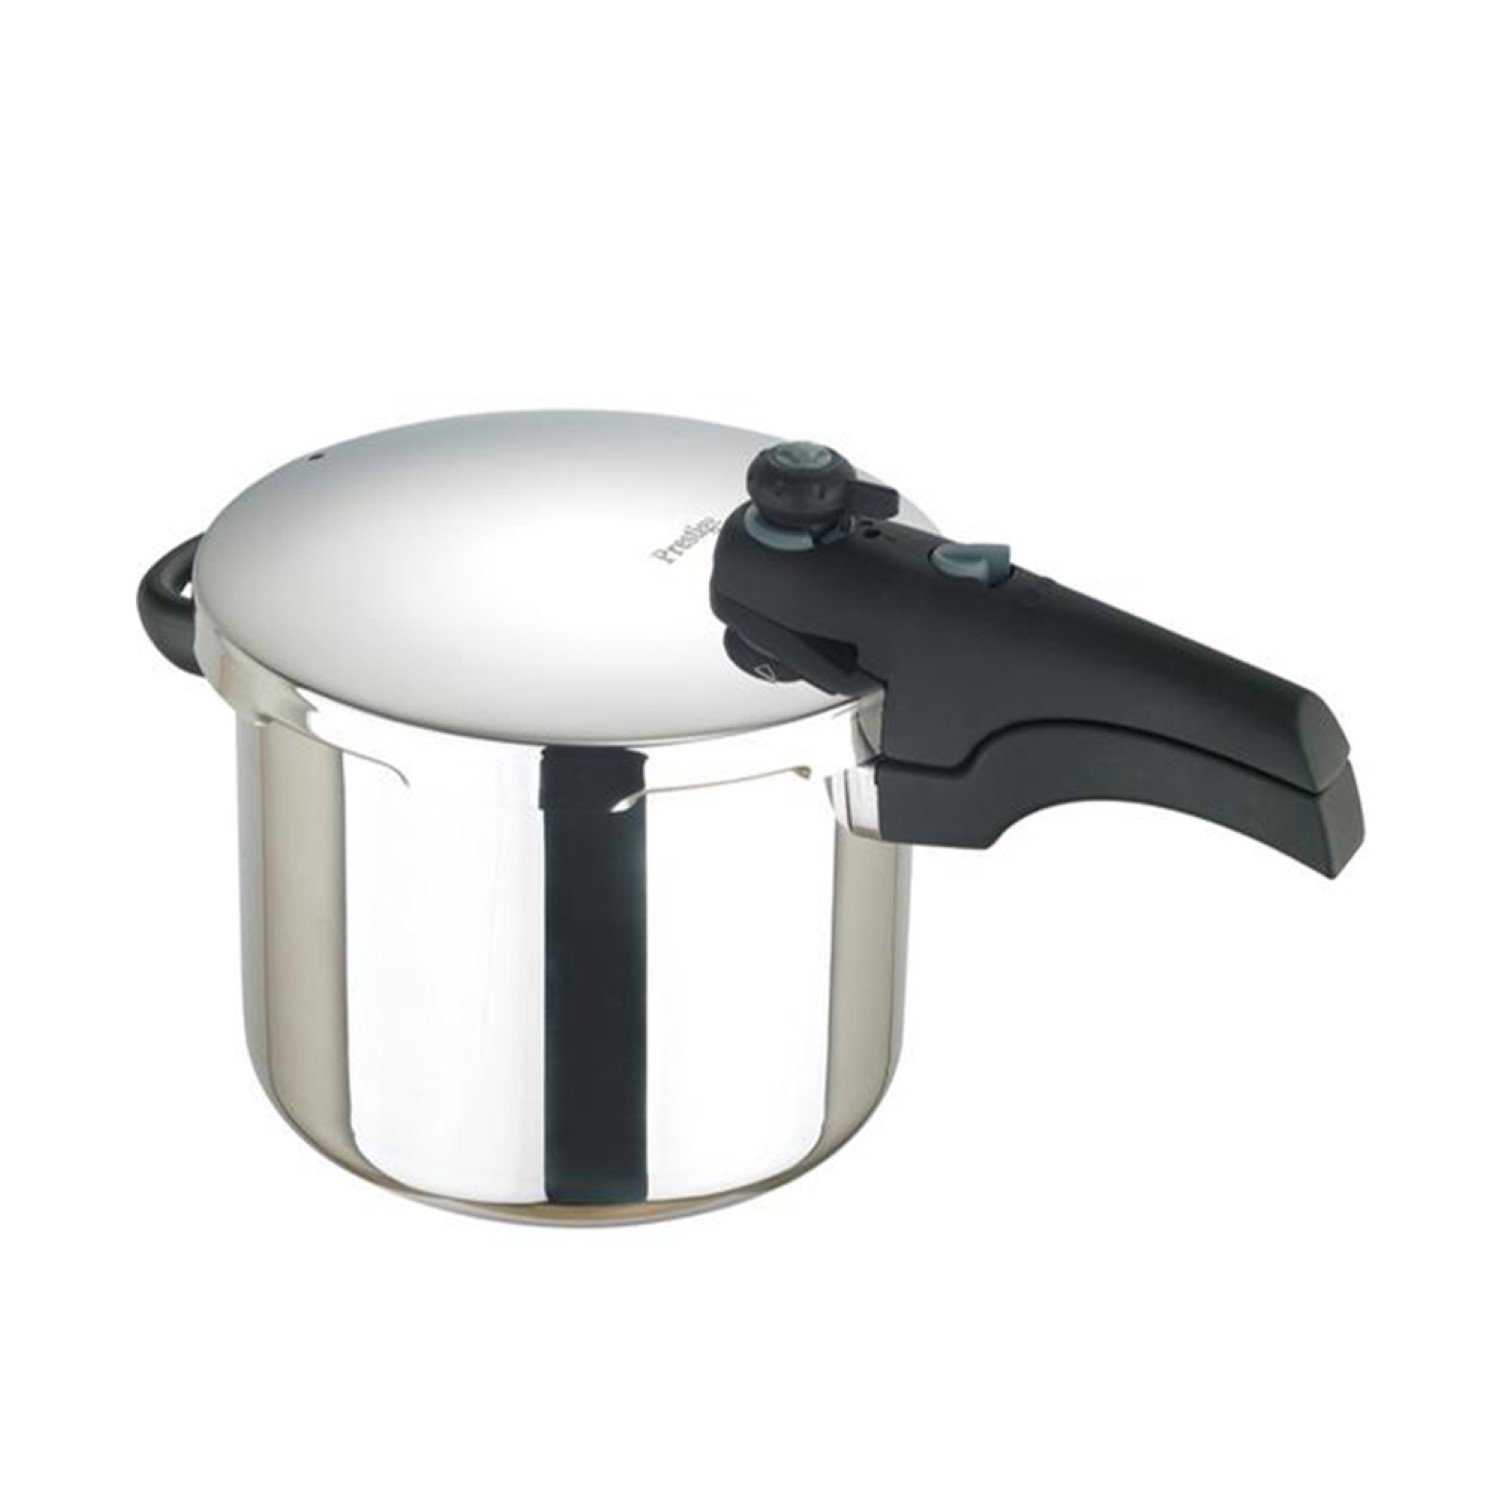 Stainless pressure cooker 6 liters